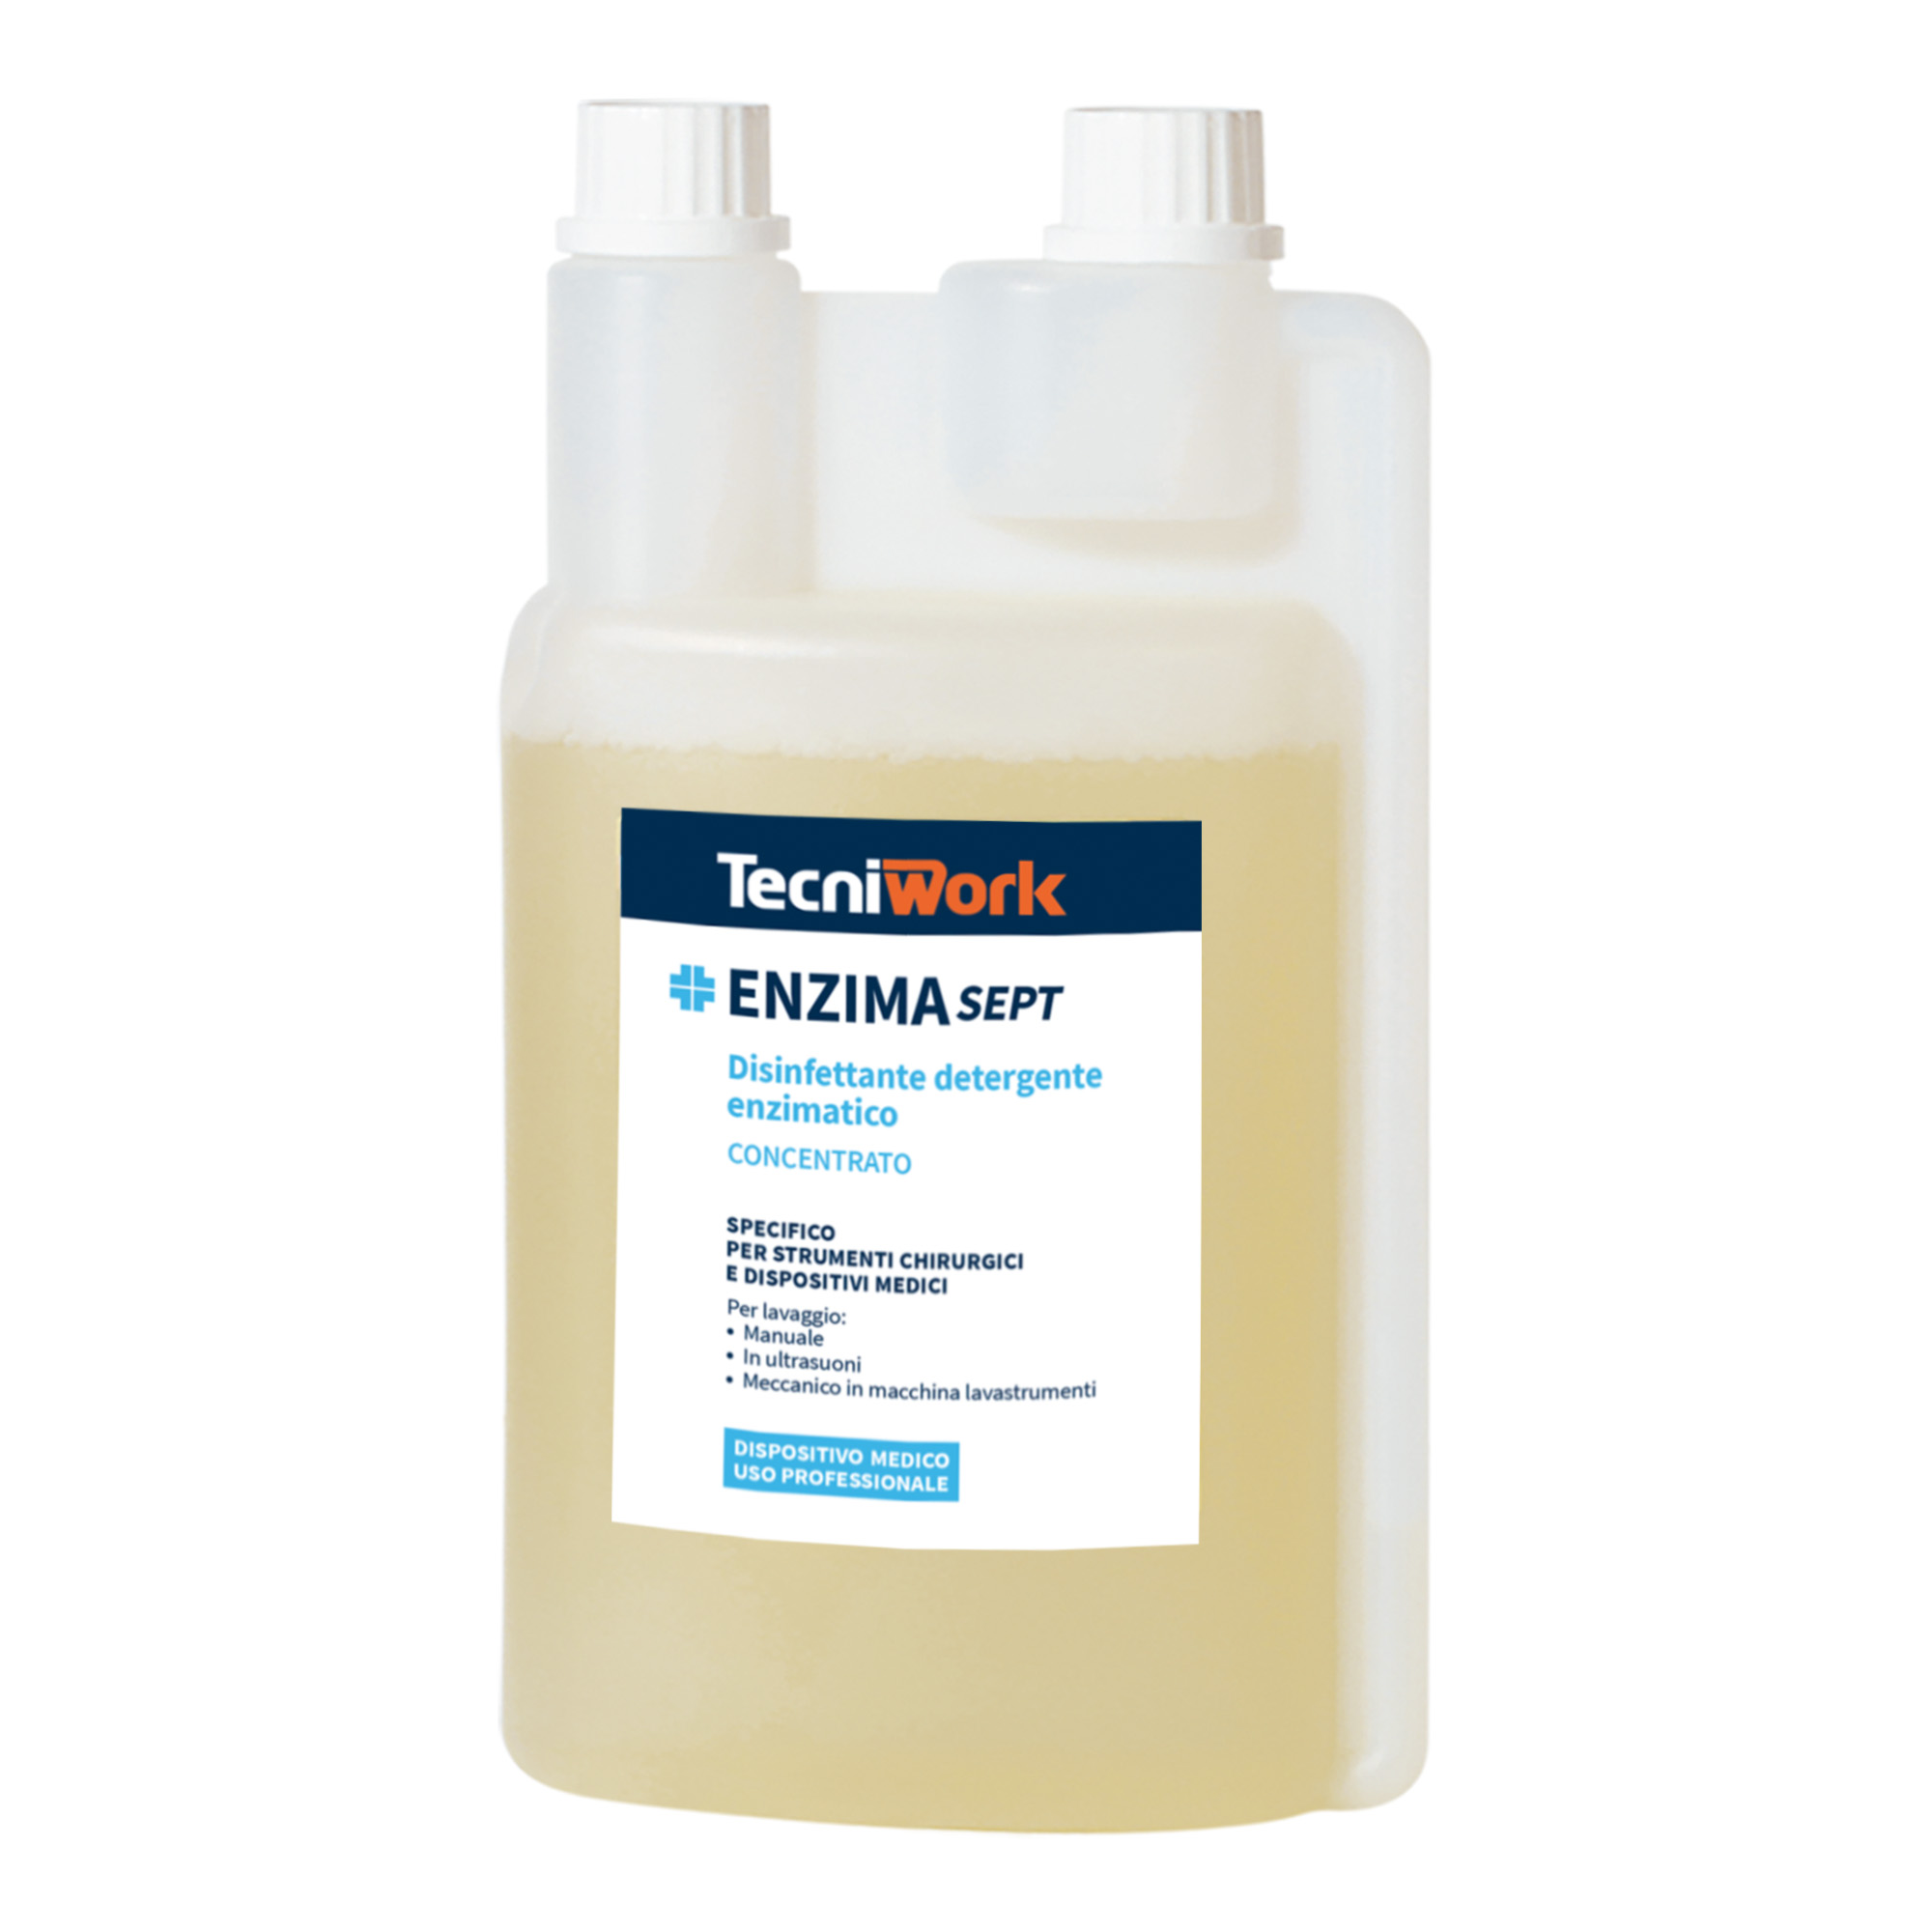 Concentrated enzymatic detergent disinfectant for instrument pre-treatment Enzimasept 1l